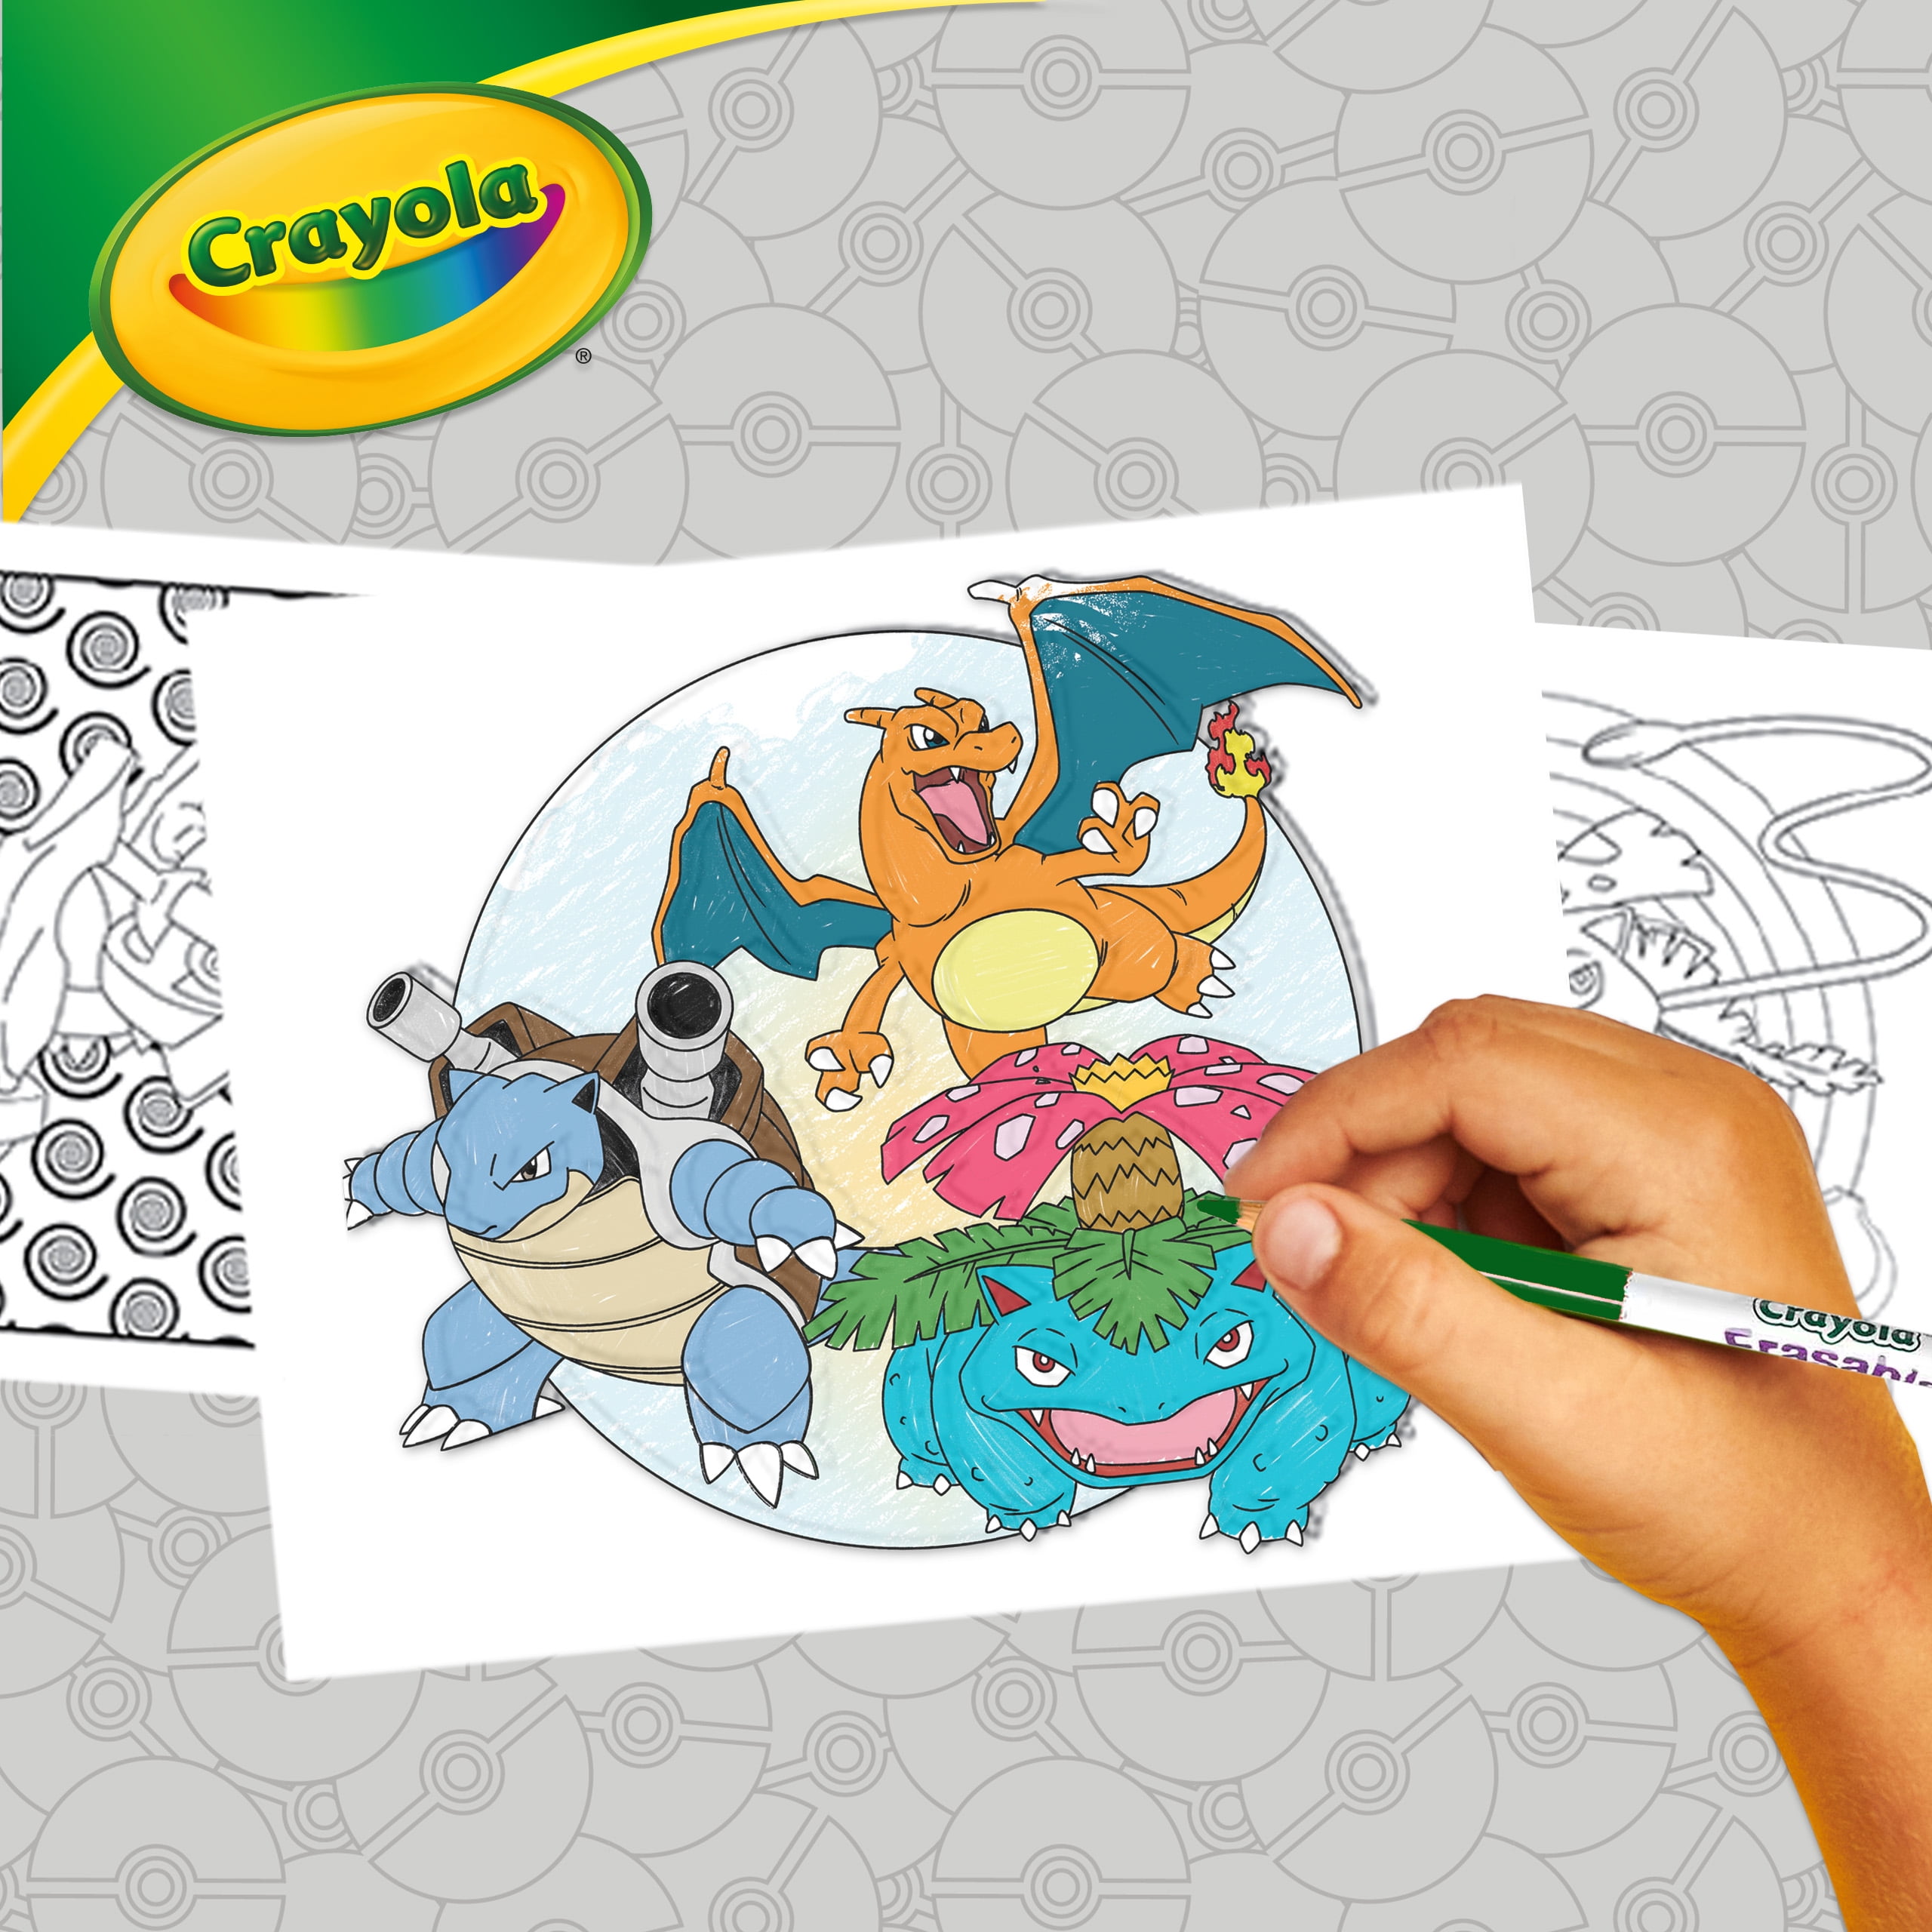 Pokemon Coloring Packs Coloring Pages Party Favor Crayola Crayons 